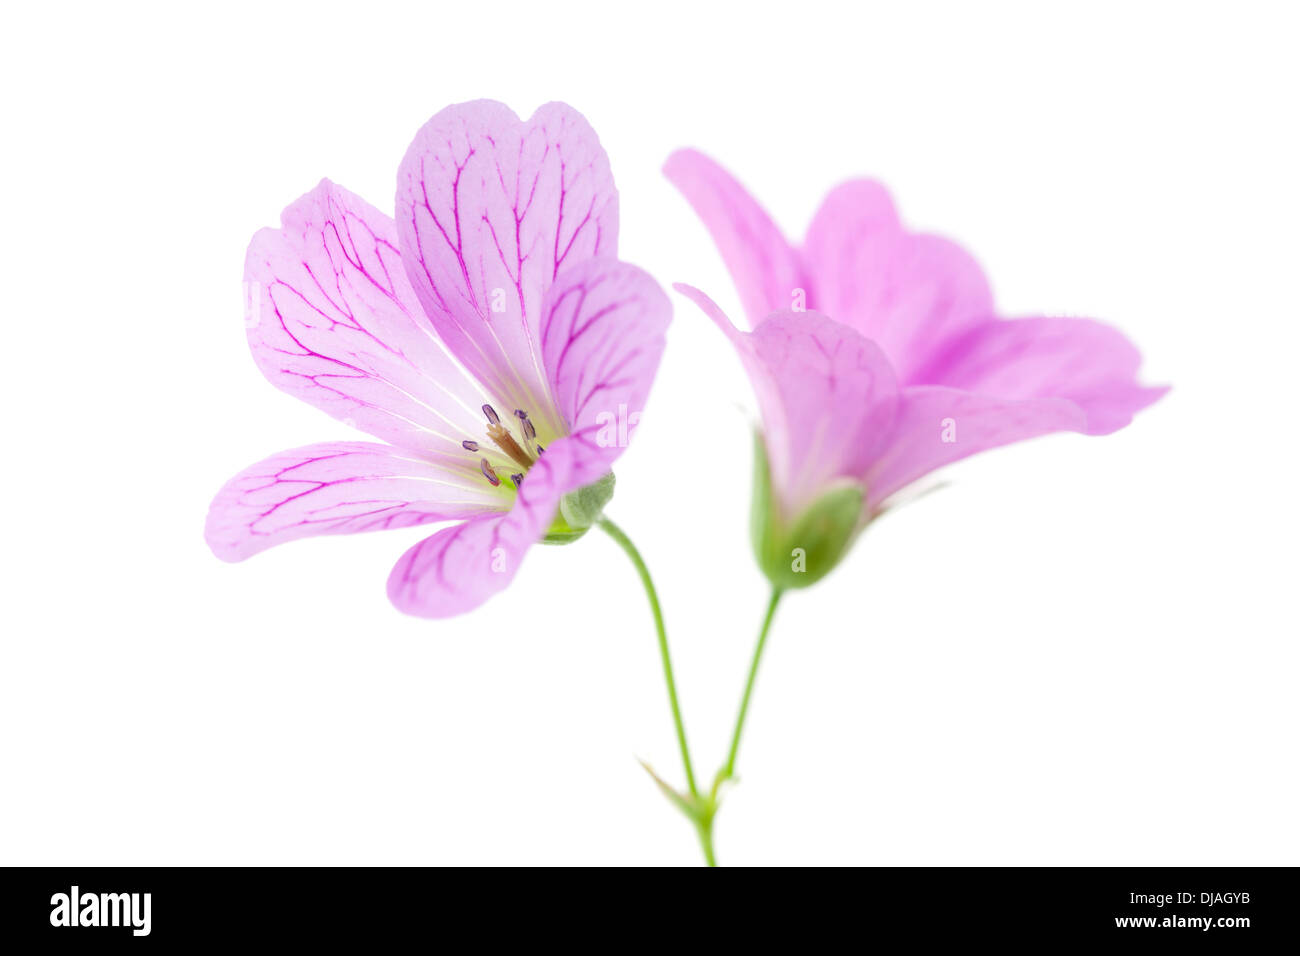 Pink Cranesbill Flowers isolated on white background with shallow depth of field. Stock Photo